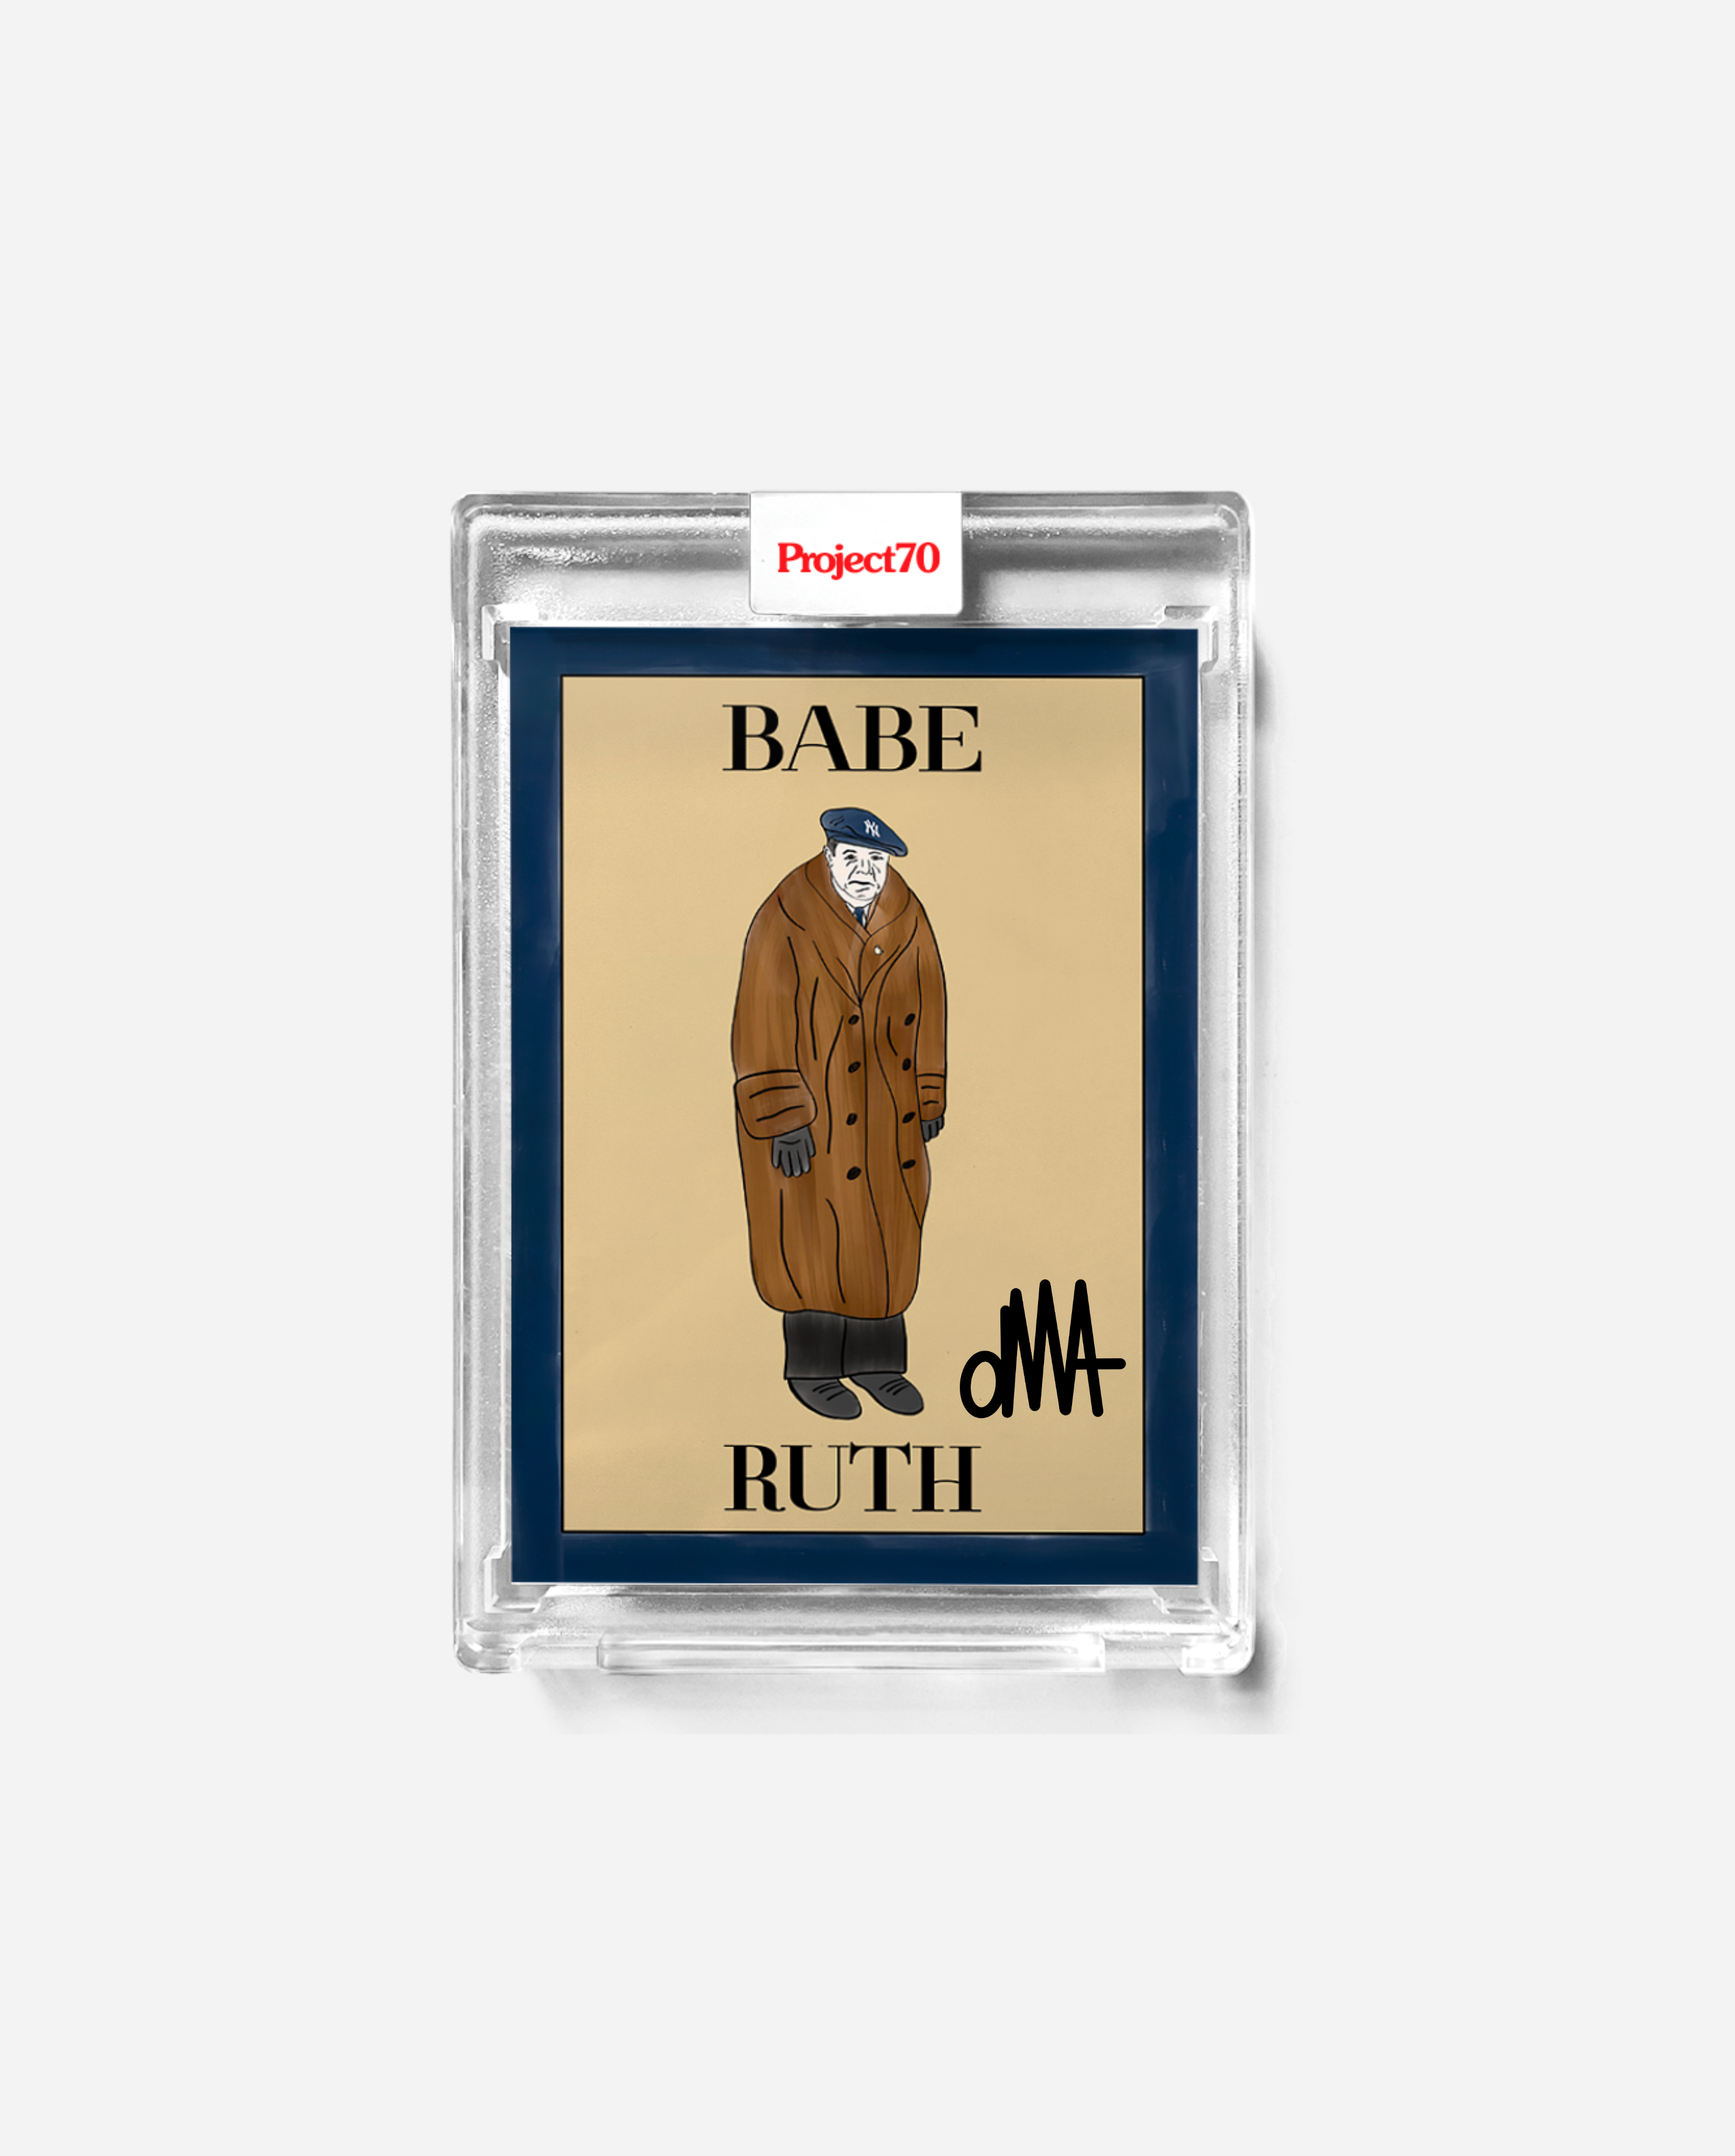 Babe Ruth x oMA x Topps Project 70 Autographed Card